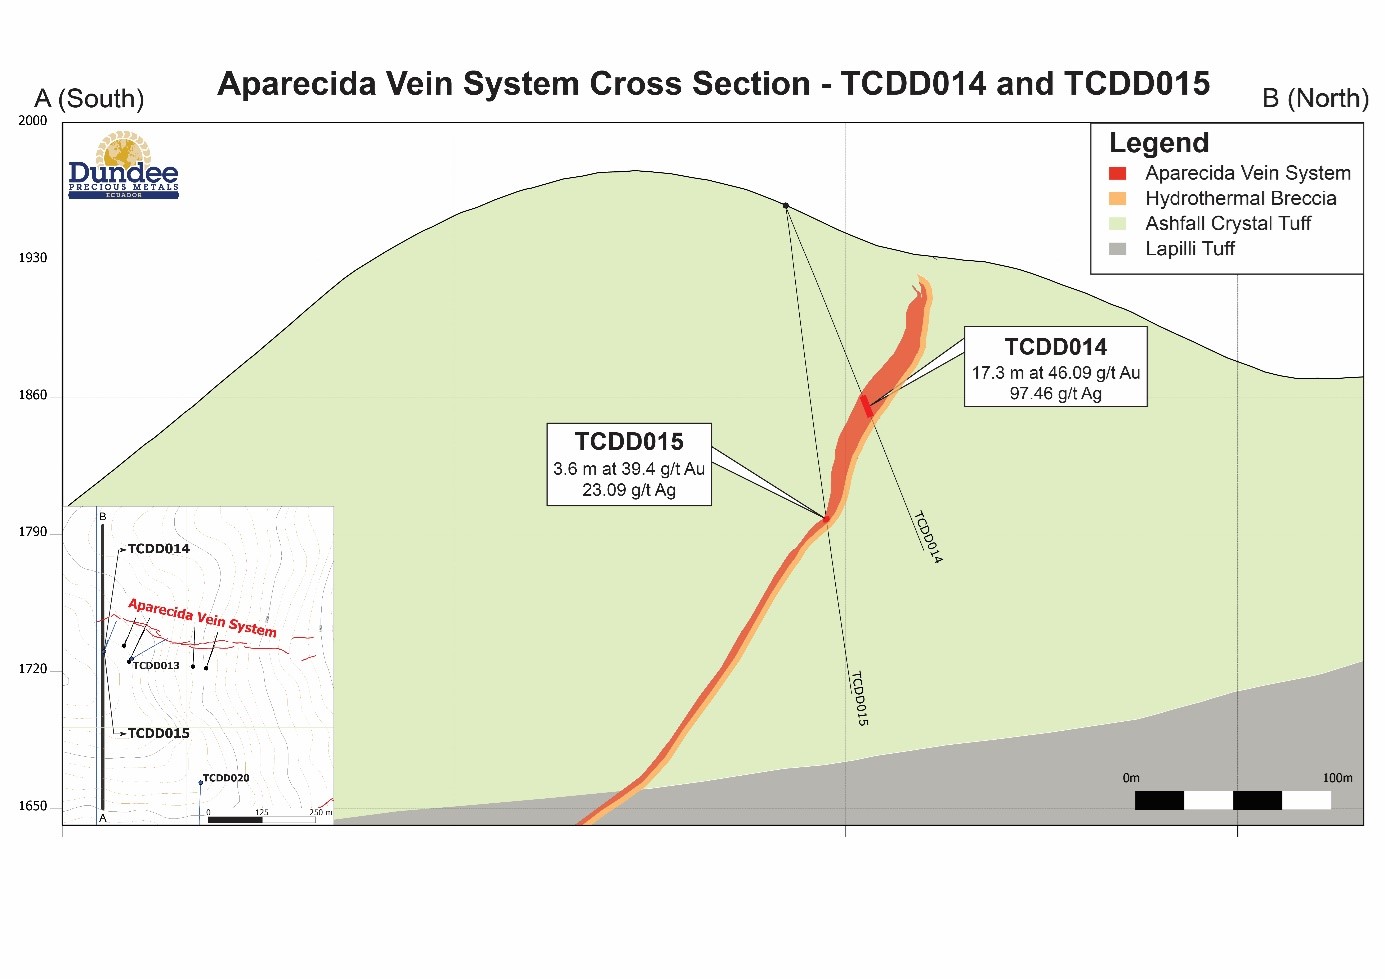 A cross section through the Aparecida Vein System showing results from TCDD014 and TCDD0015 as well as interpreted geology.